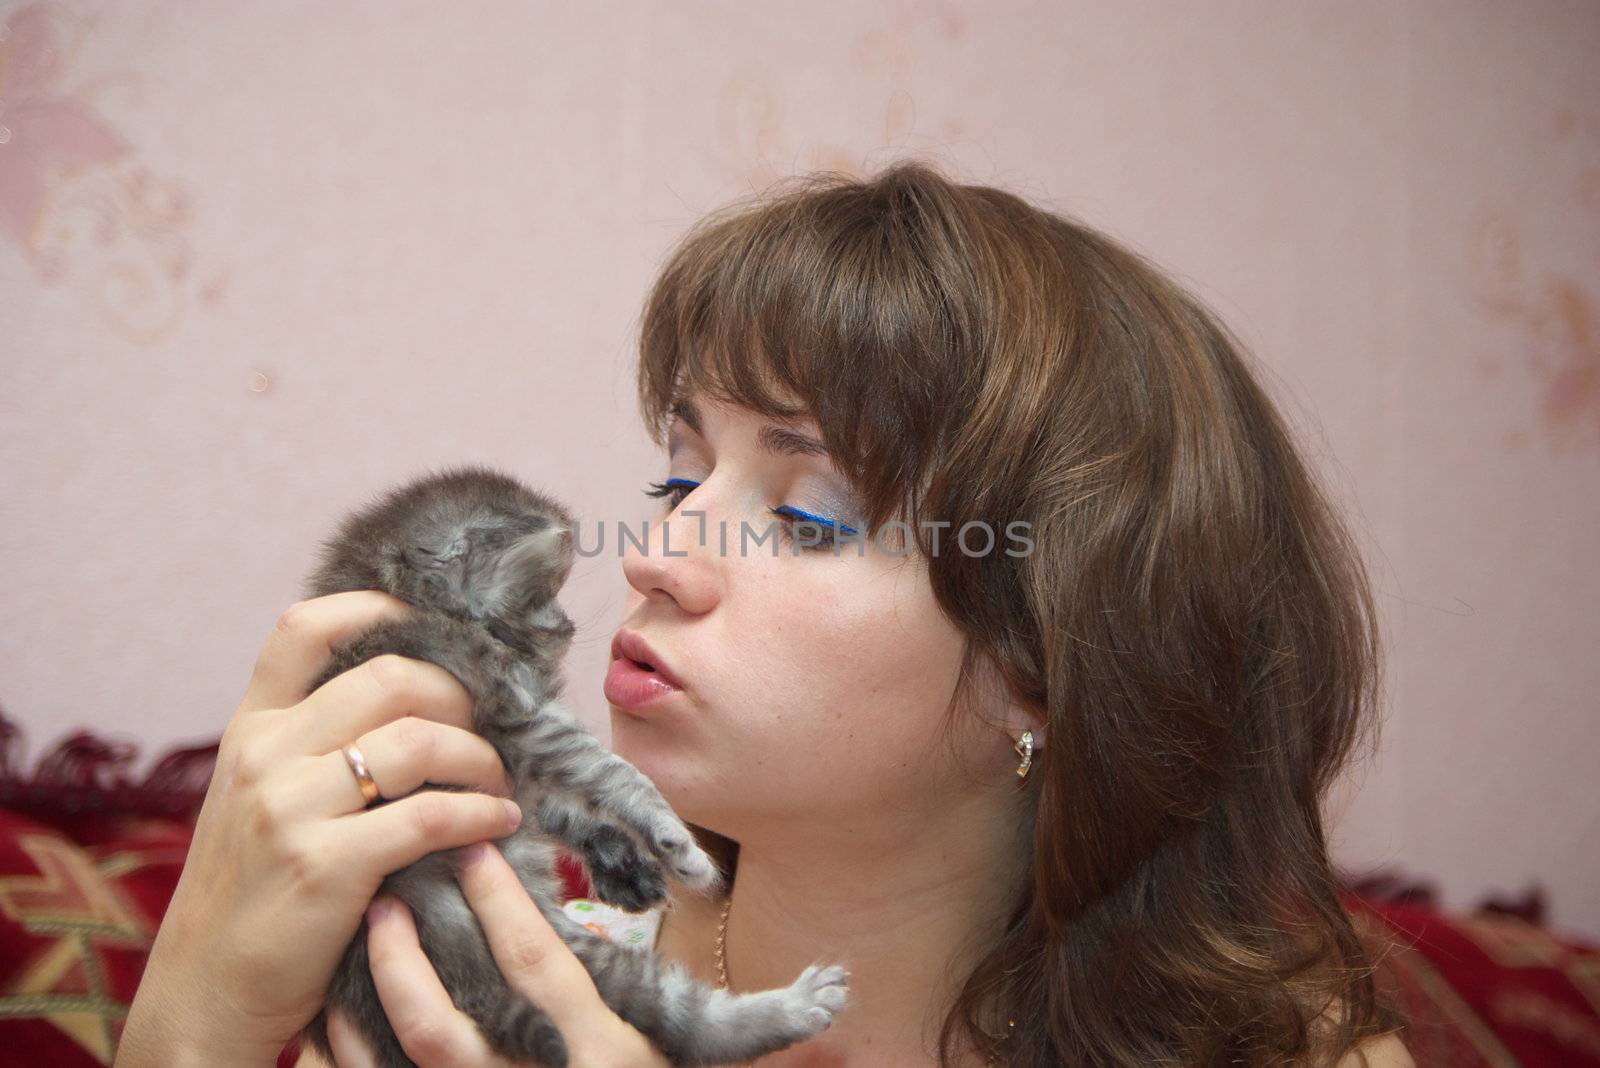 photo of the beautiful woman playing with kitty